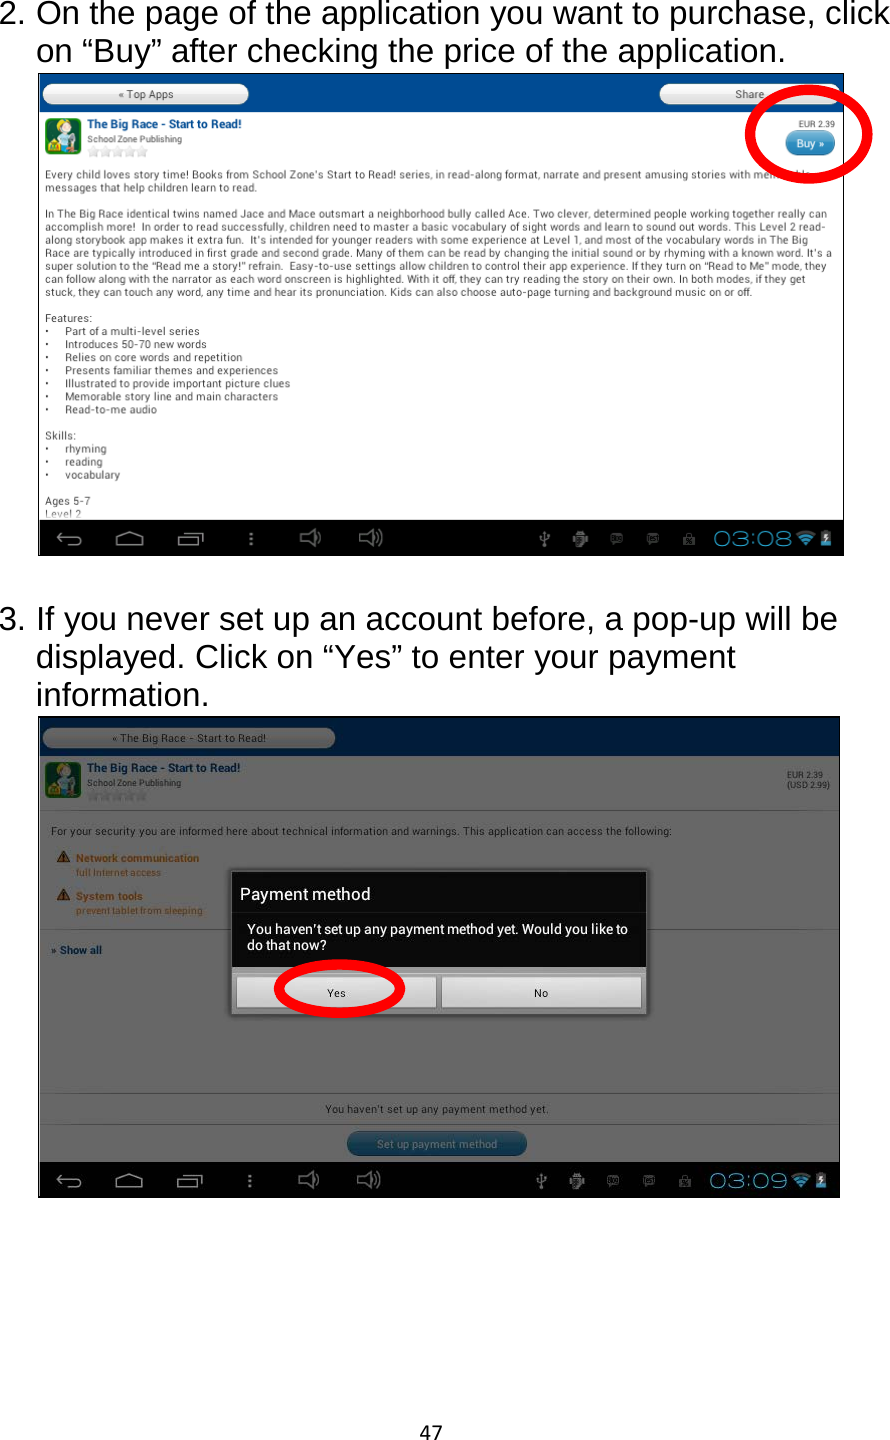 47  2. On the page of the application you want to purchase, click on “Buy” after checking the price of the application.    3. If you never set up an account before, a pop-up will be displayed. Click on “Yes” to enter your payment information.        